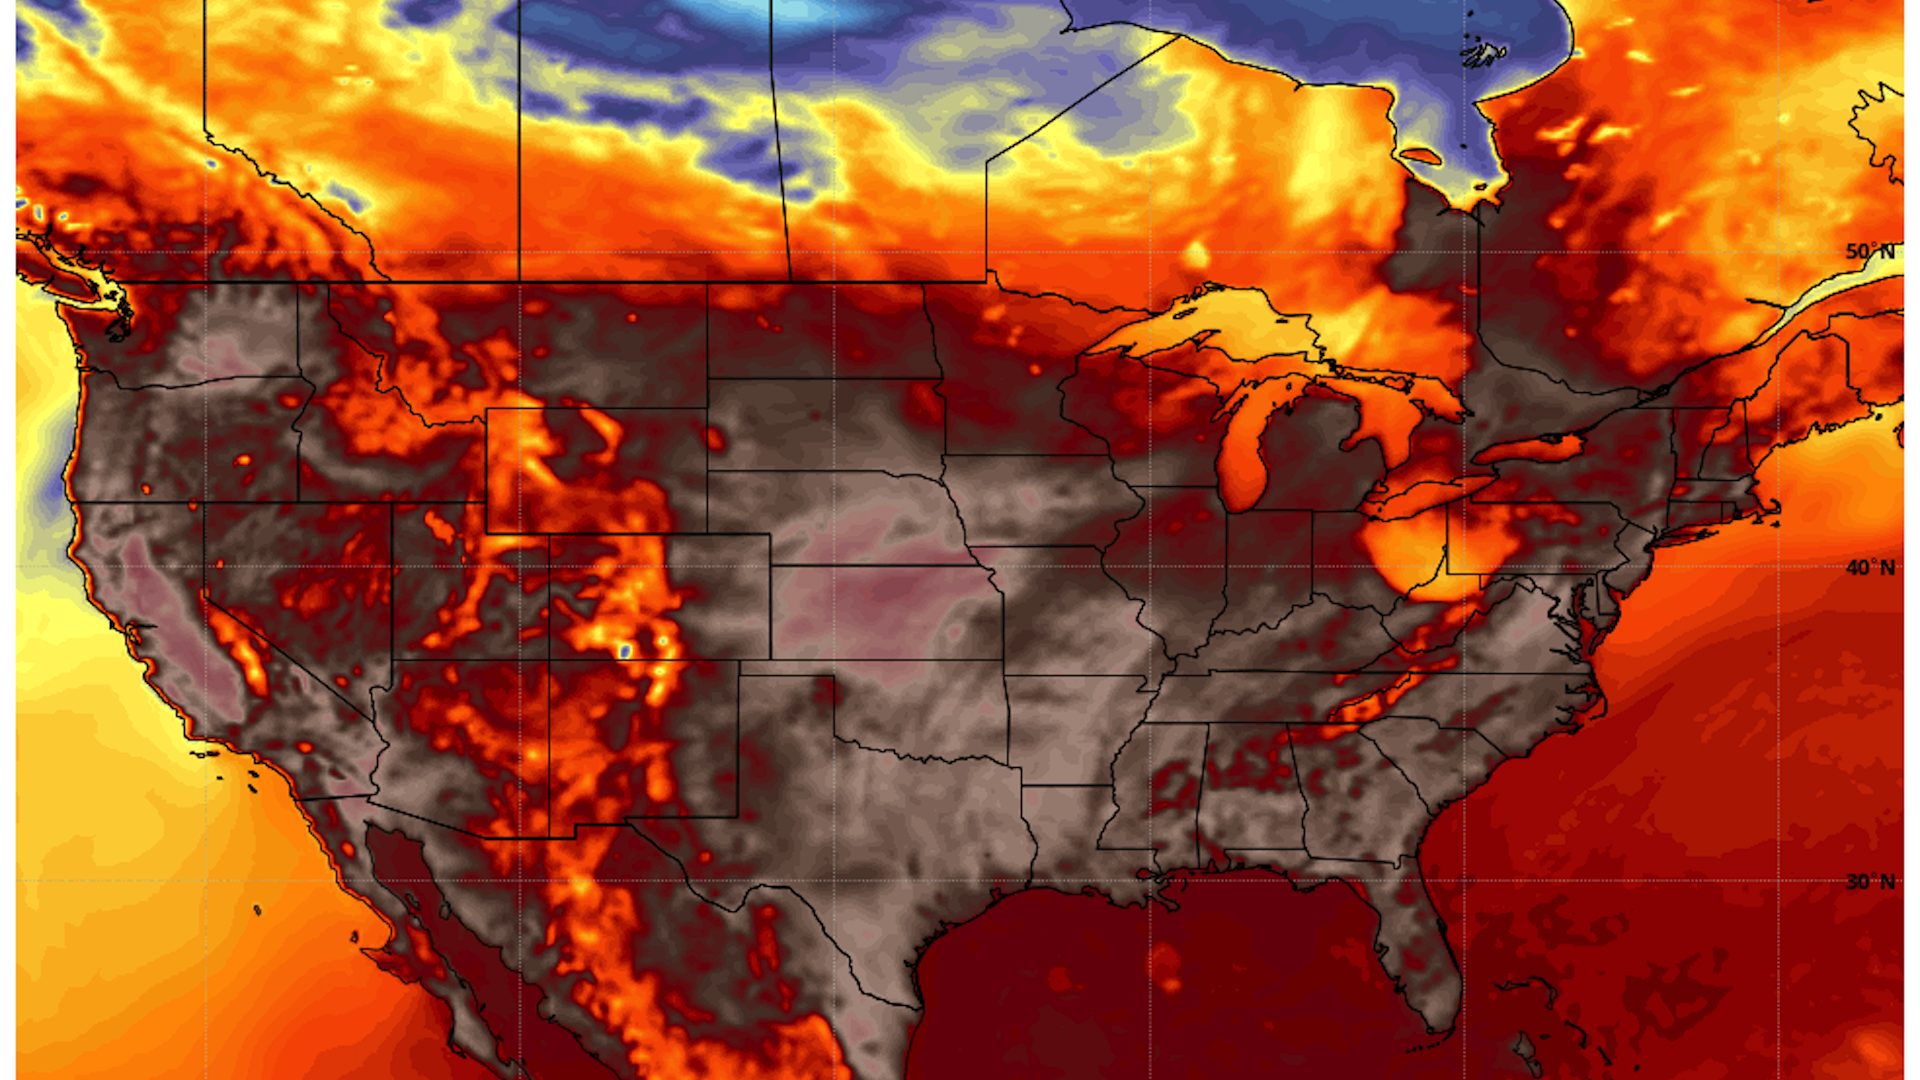 Weather map of the United States showing orange and red colors marking a heat wave in August 2021.